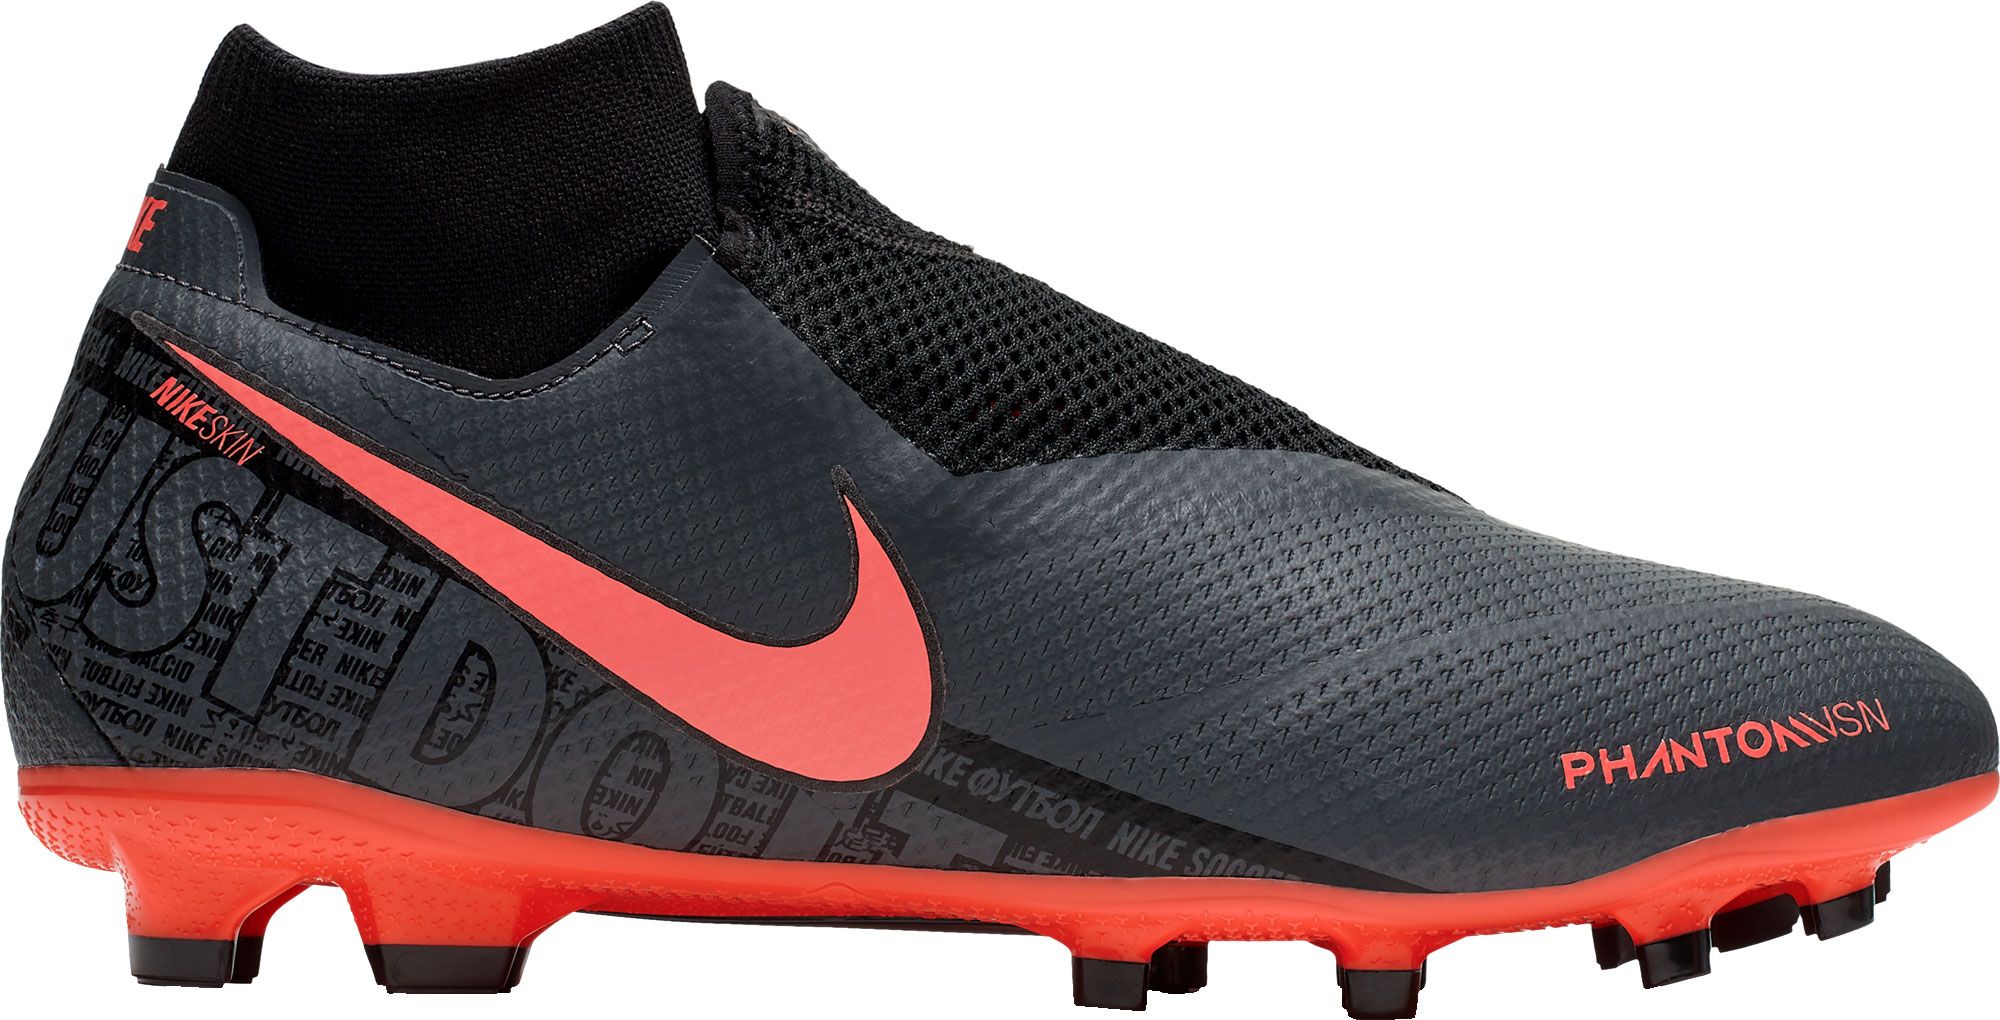 Nike Phantom Vision Pro Dynamic Fit FG Soccer Cleats | DICK'S Sporting Goods